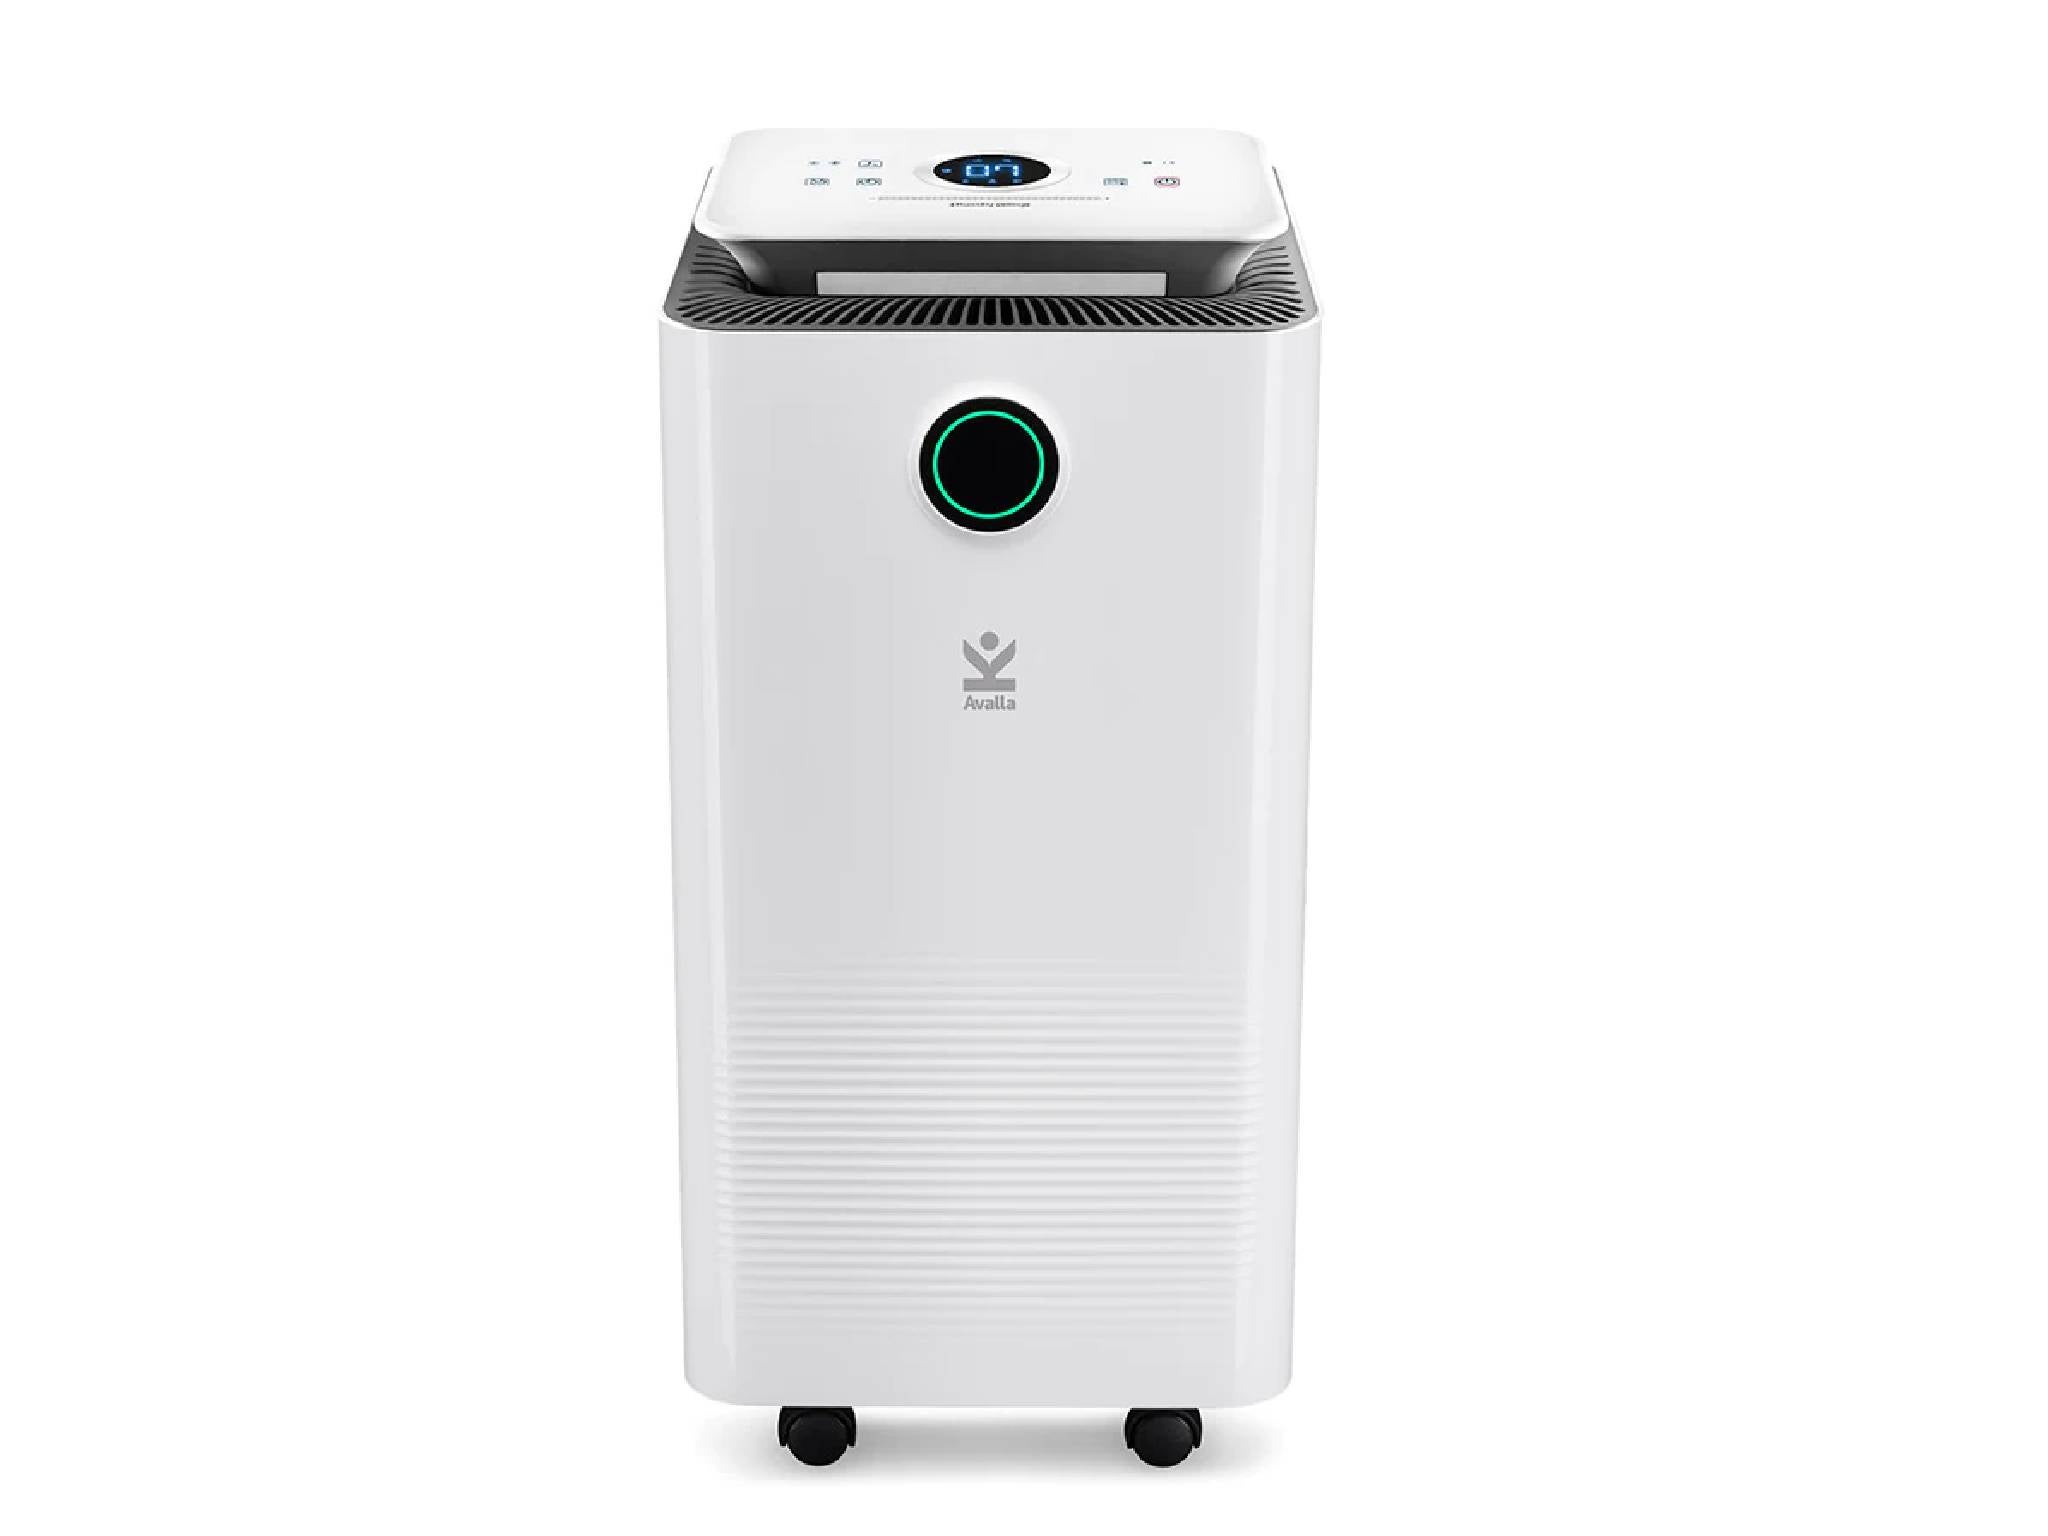 deals, indybest, amazon, black friday, the best black friday dehumidifier deals for tackling damp at home